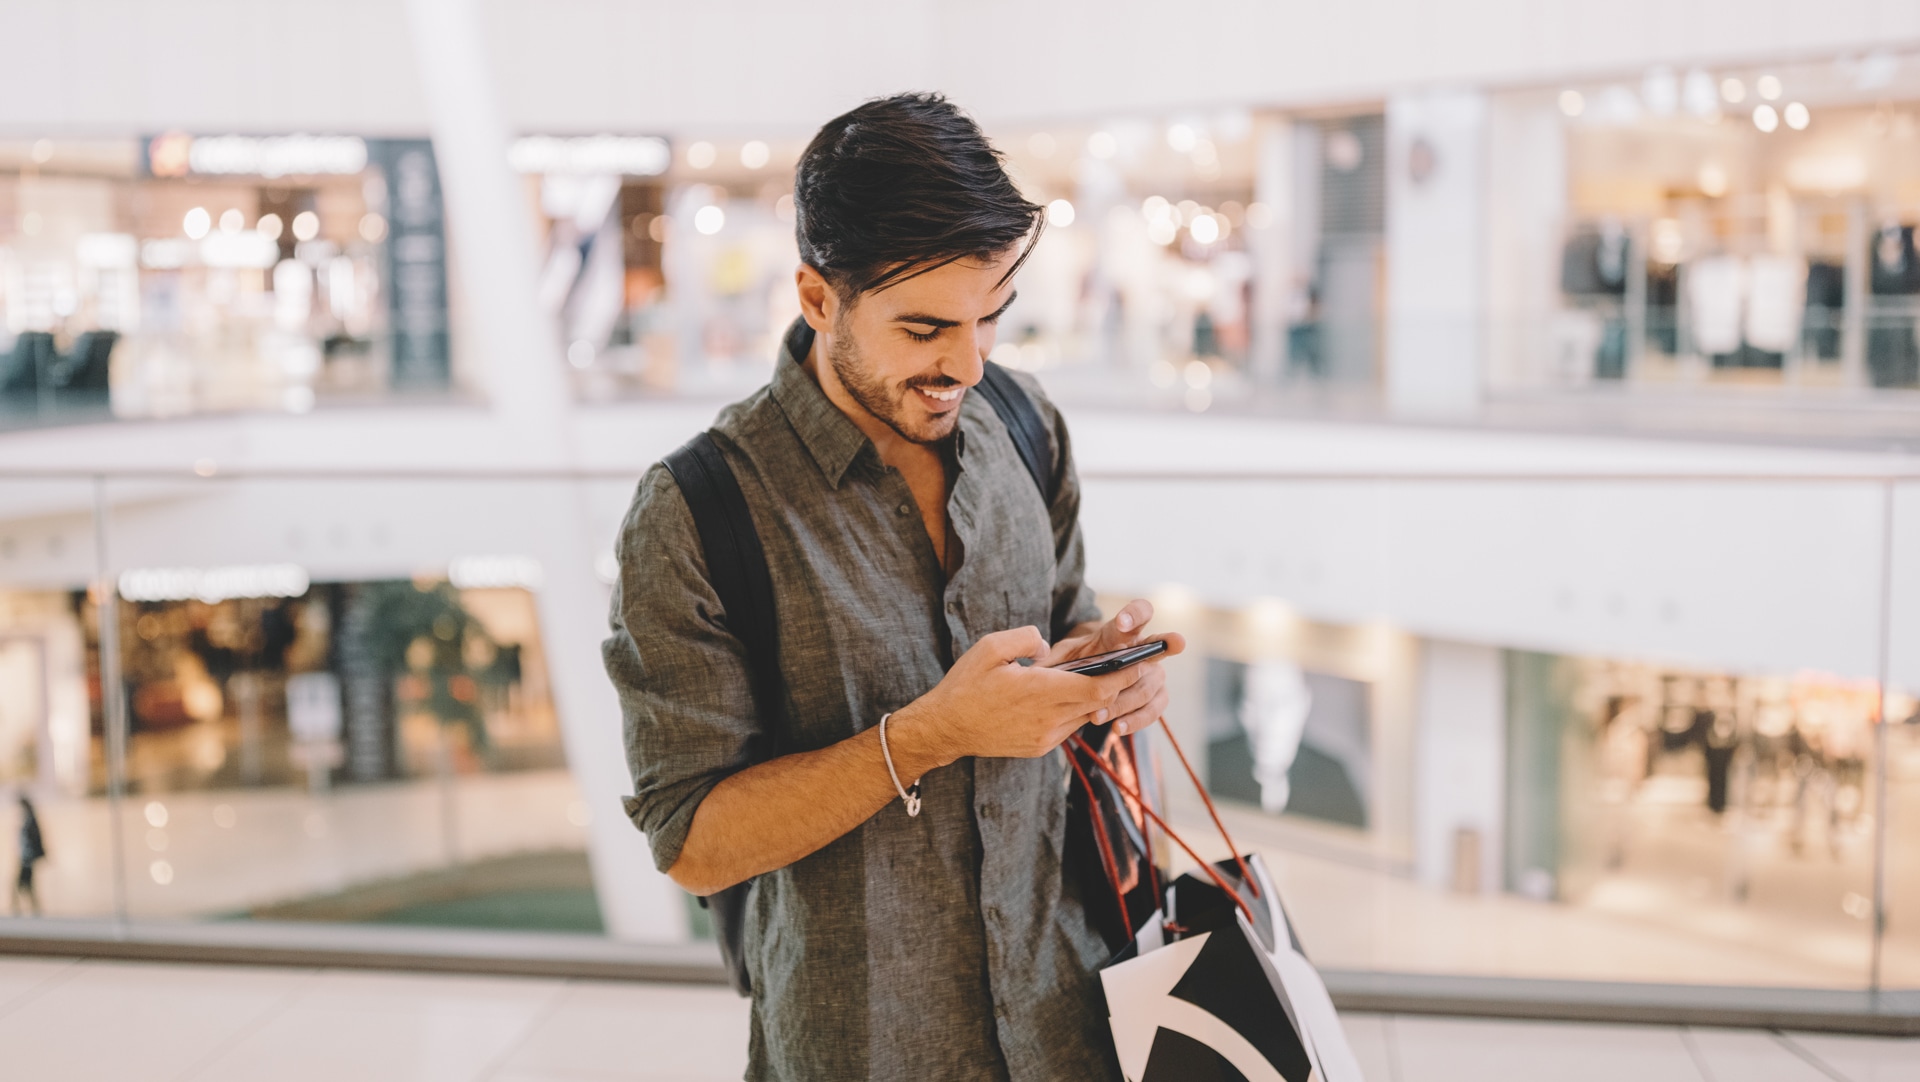 Shopping in the Digital Age